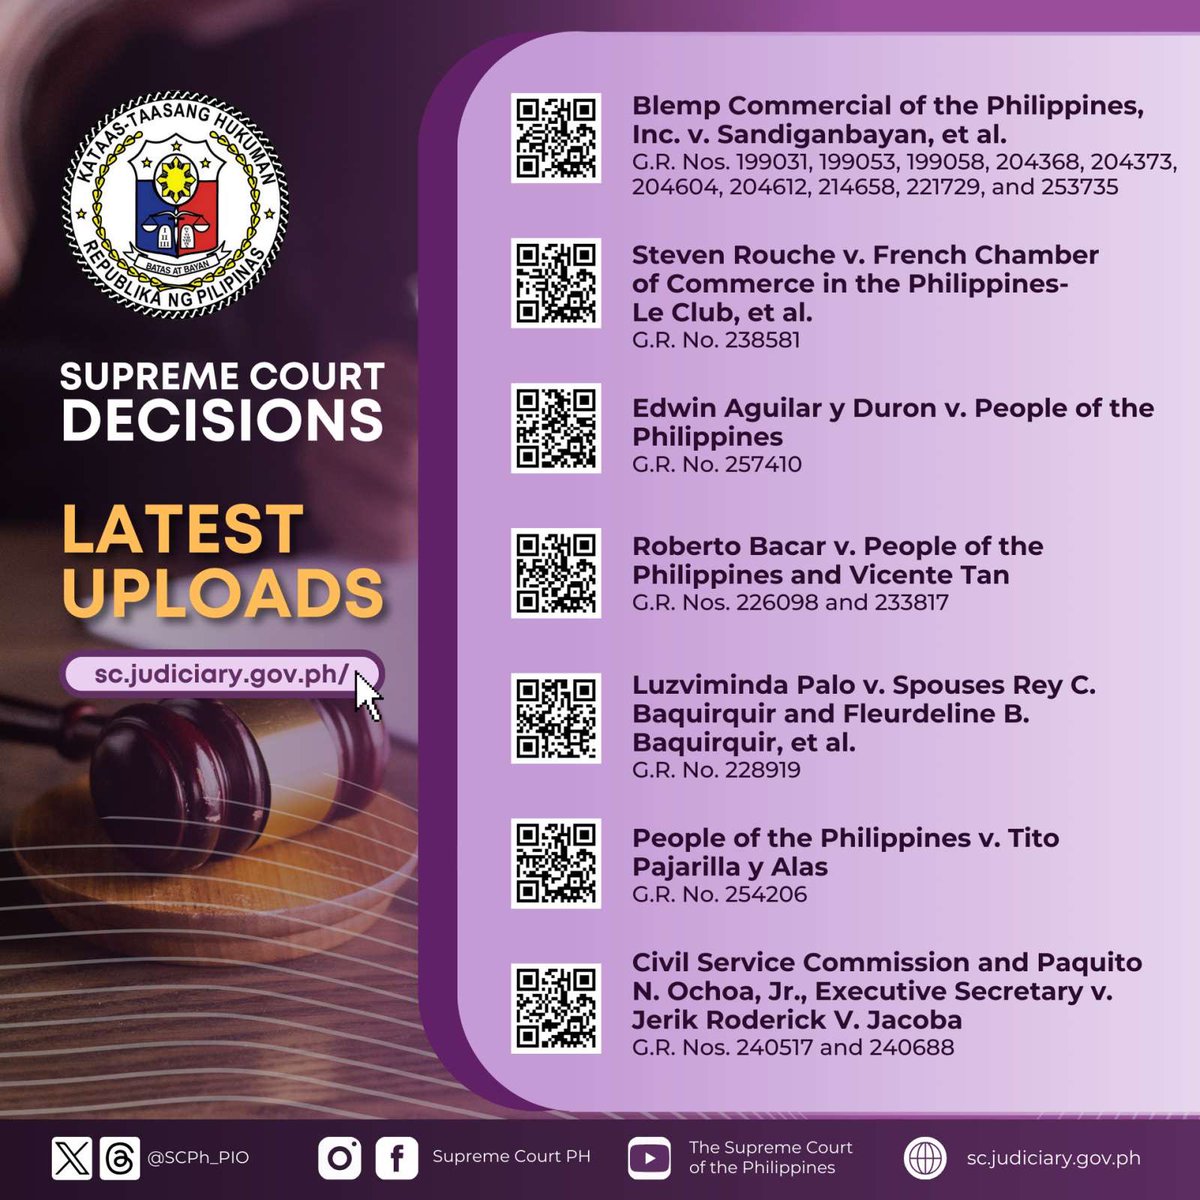 Stay informed with the latest Court Decisions uploaded to the Supreme Court Website. Read the Decisions in full at sc.judiciary.gov.ph/decisions-and-…, or scan the QR codes.